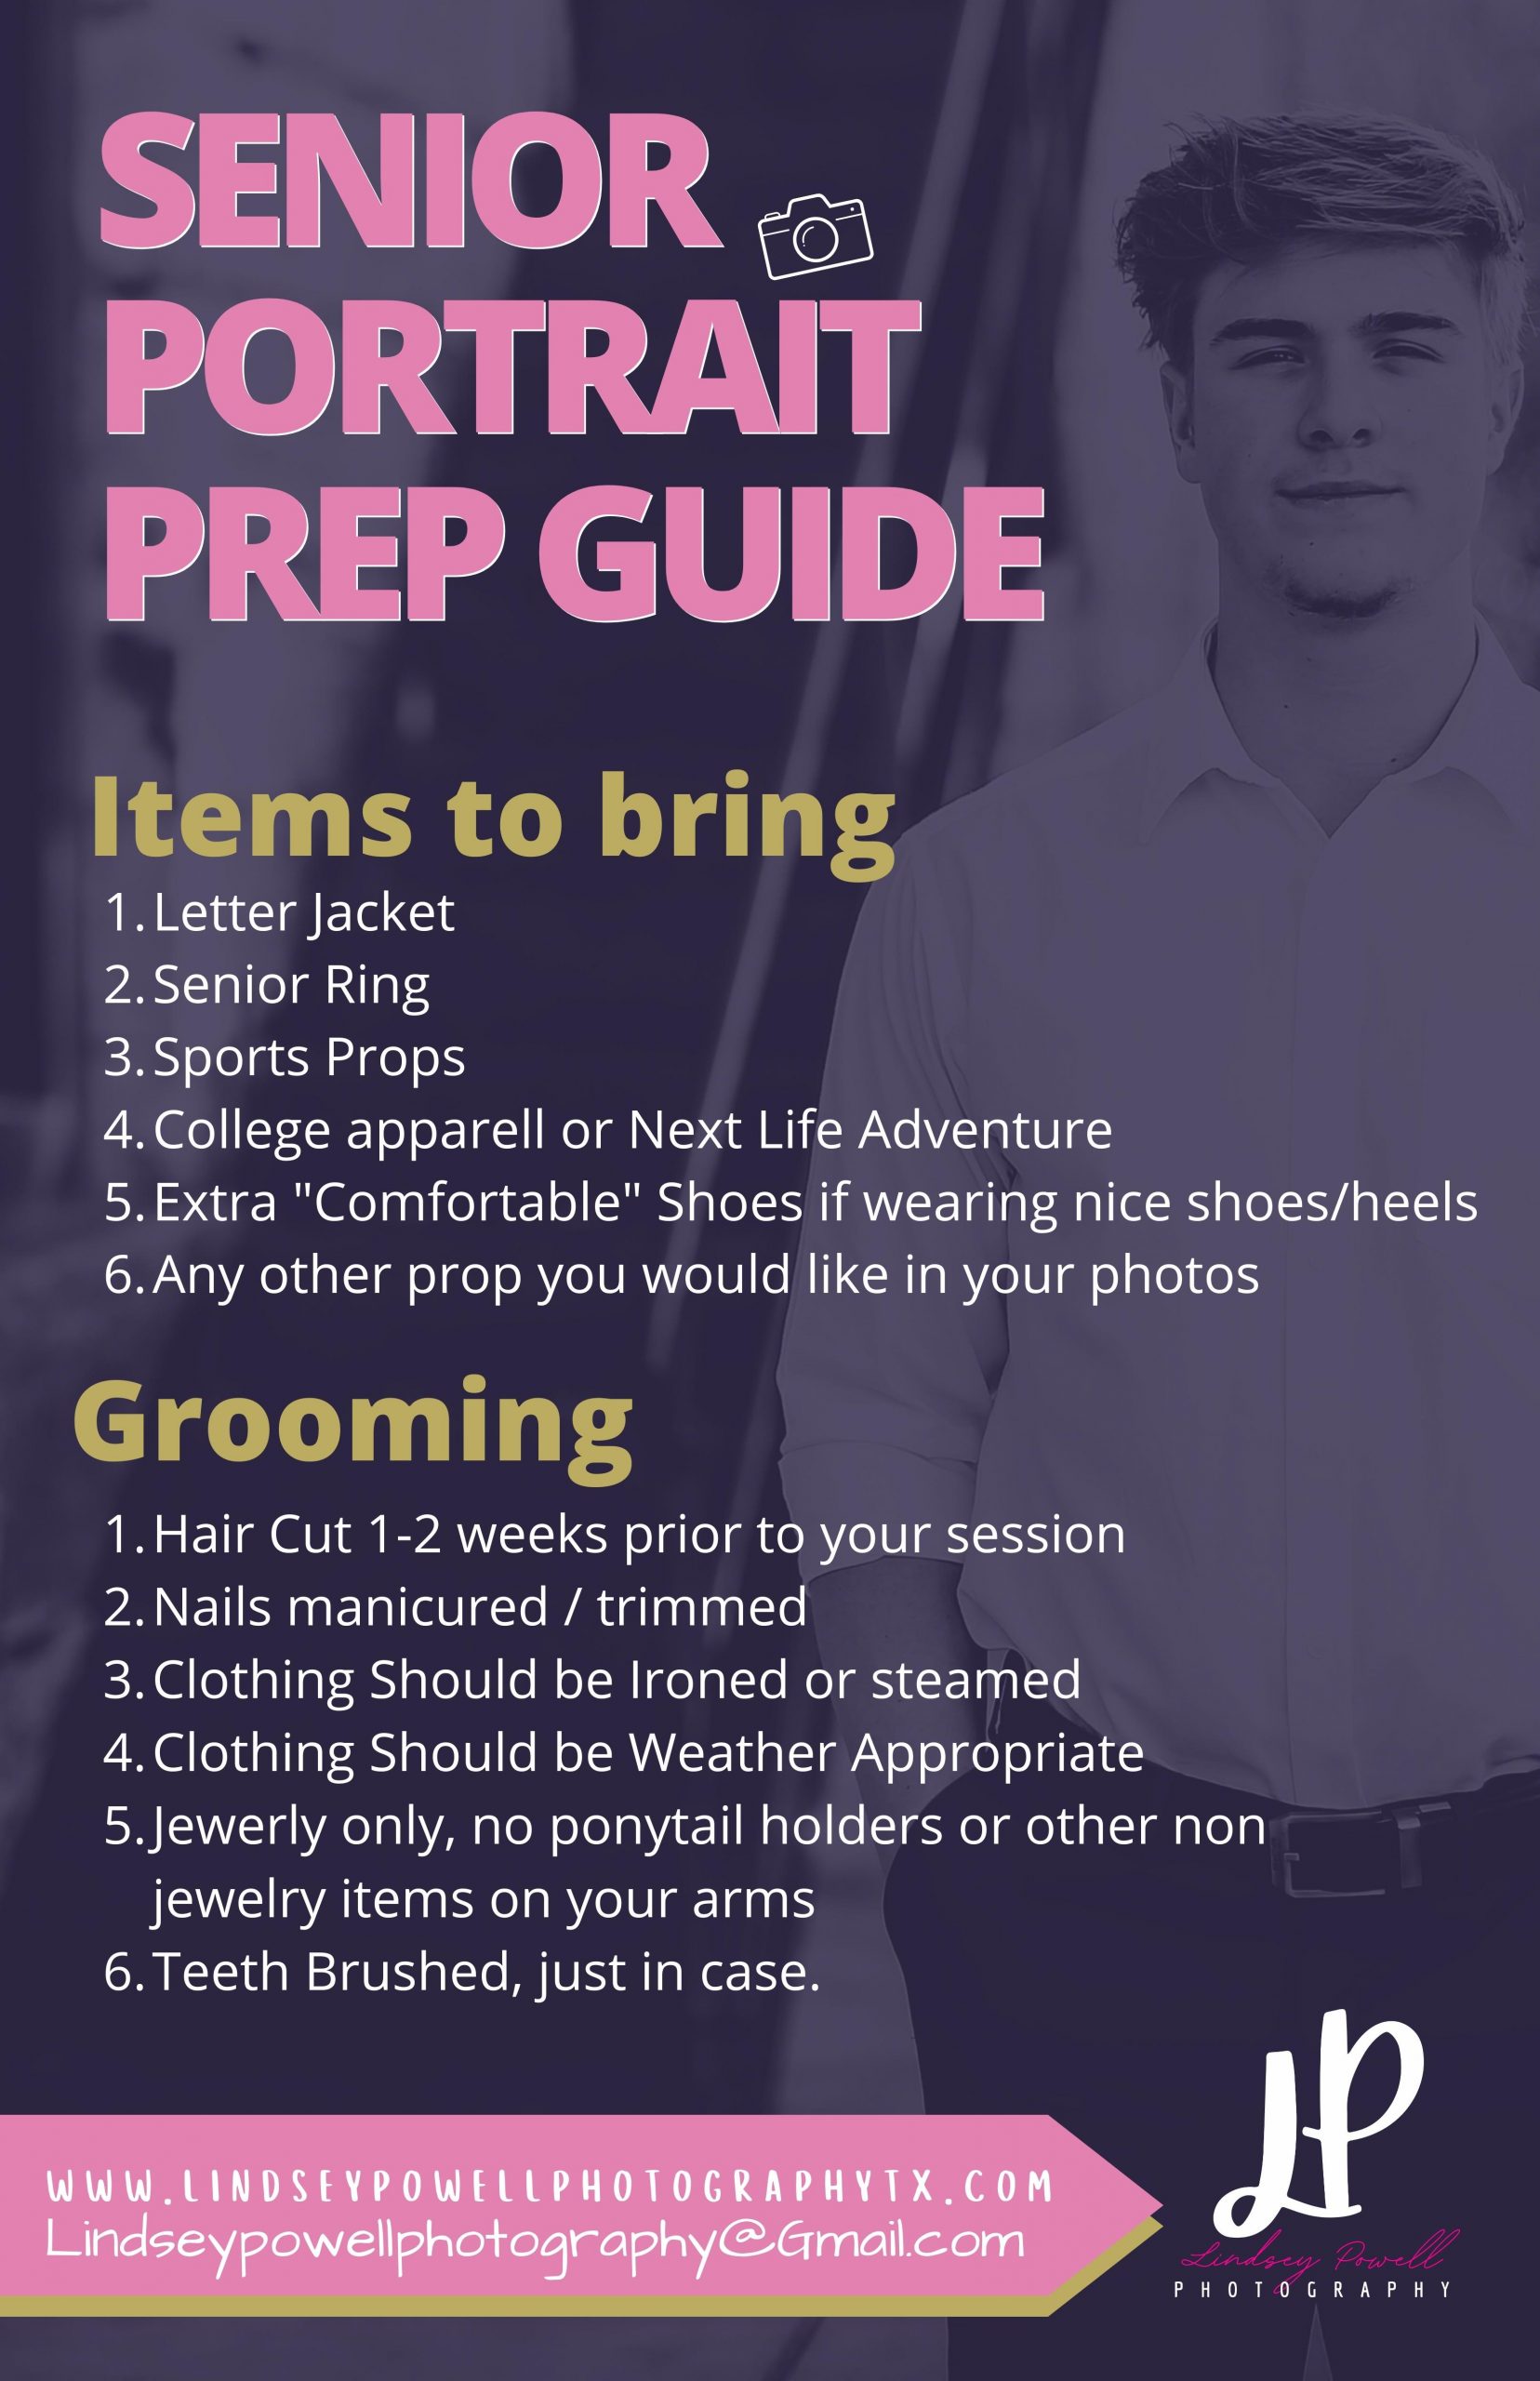 Informing photography clients about prepping for their upcoming session.
Senior Portrait Prep Guide.